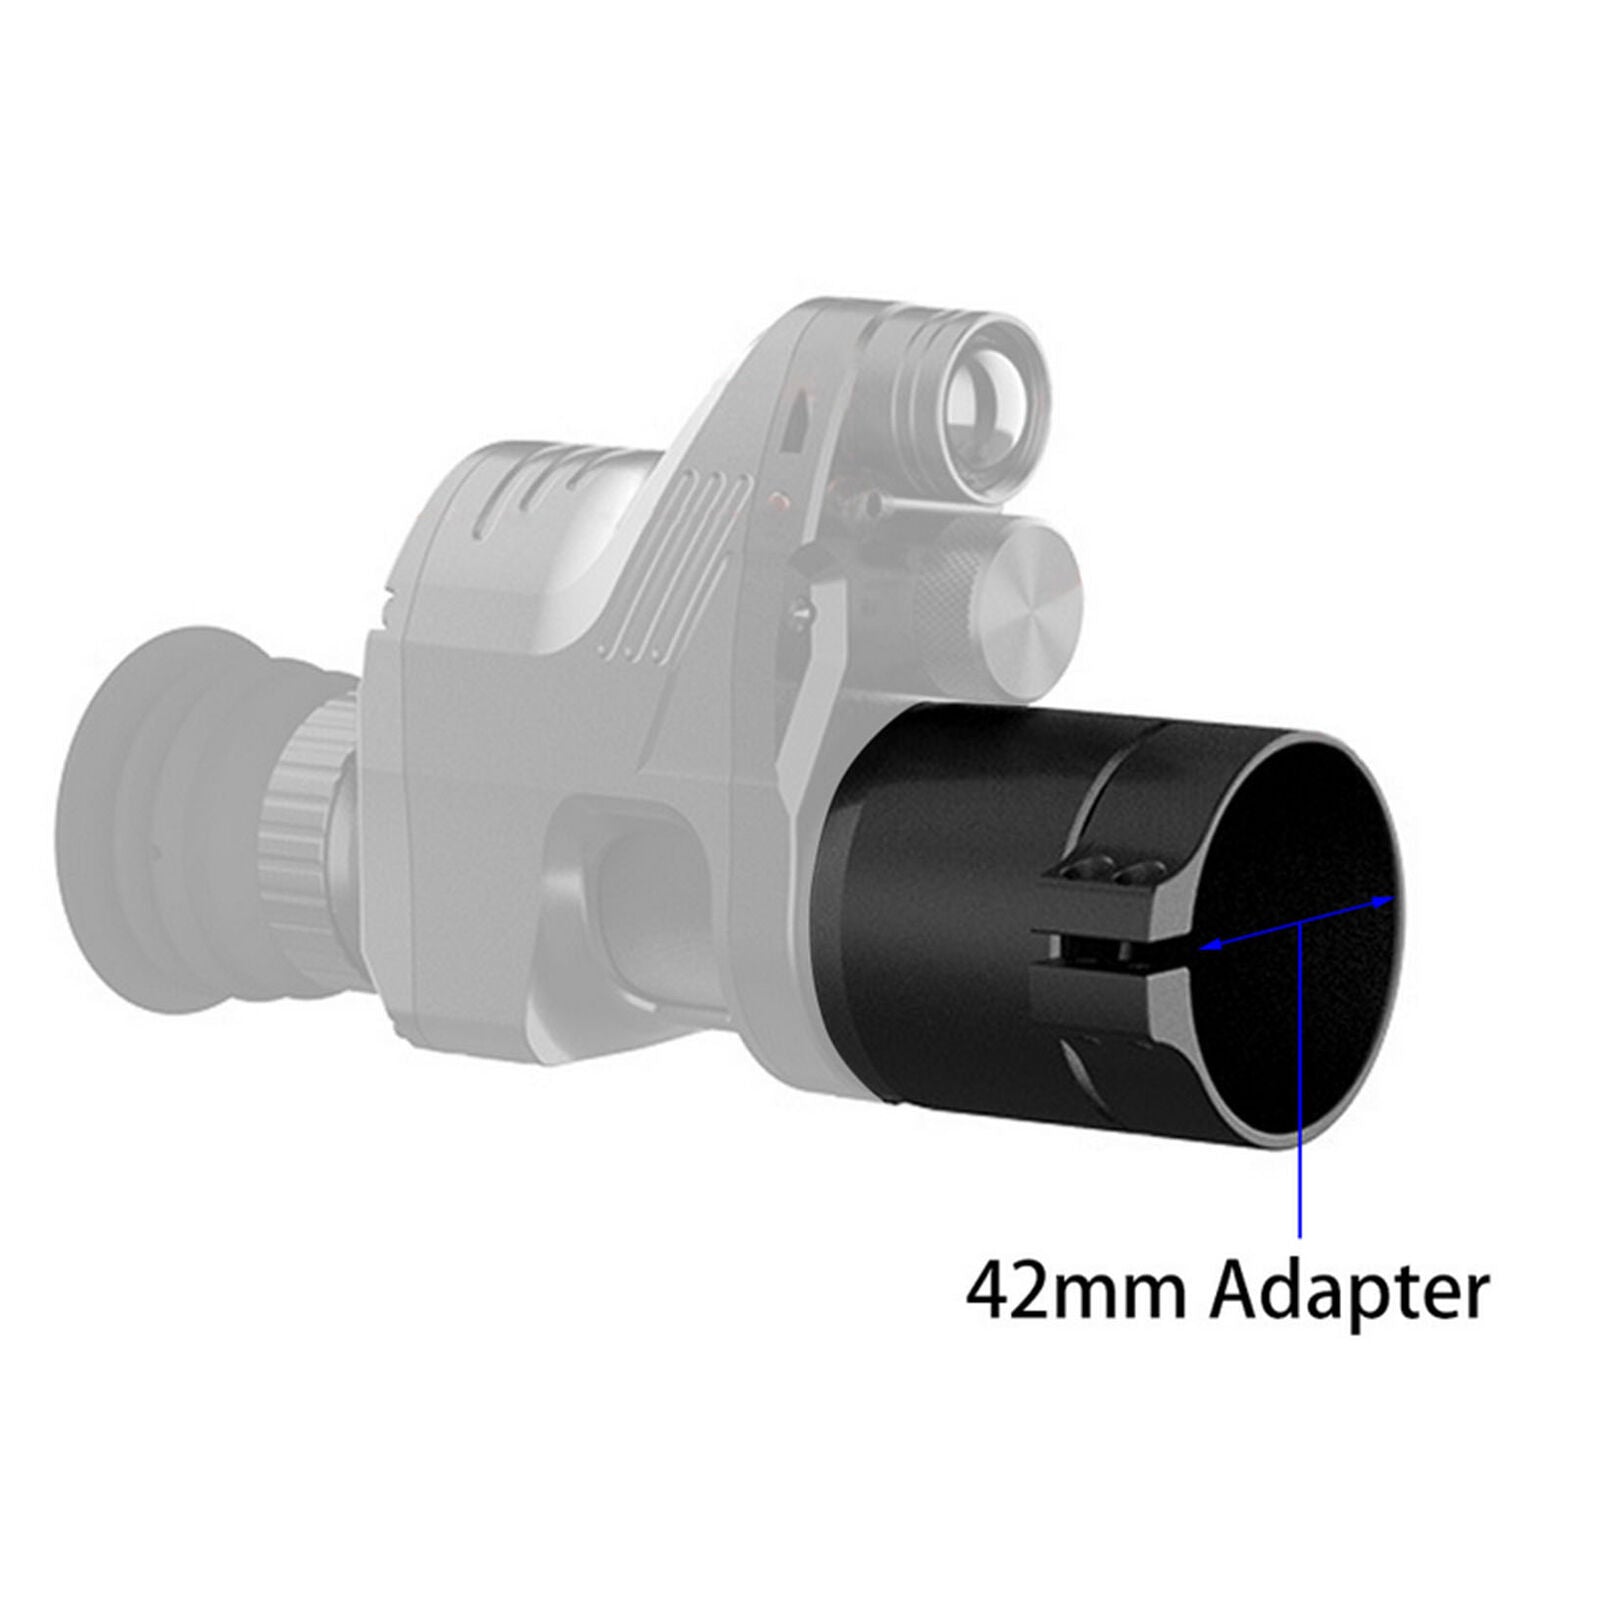 Night Vision Adapter 42mm Snap Ring for PARD NV007 Night Vision Snap Ring